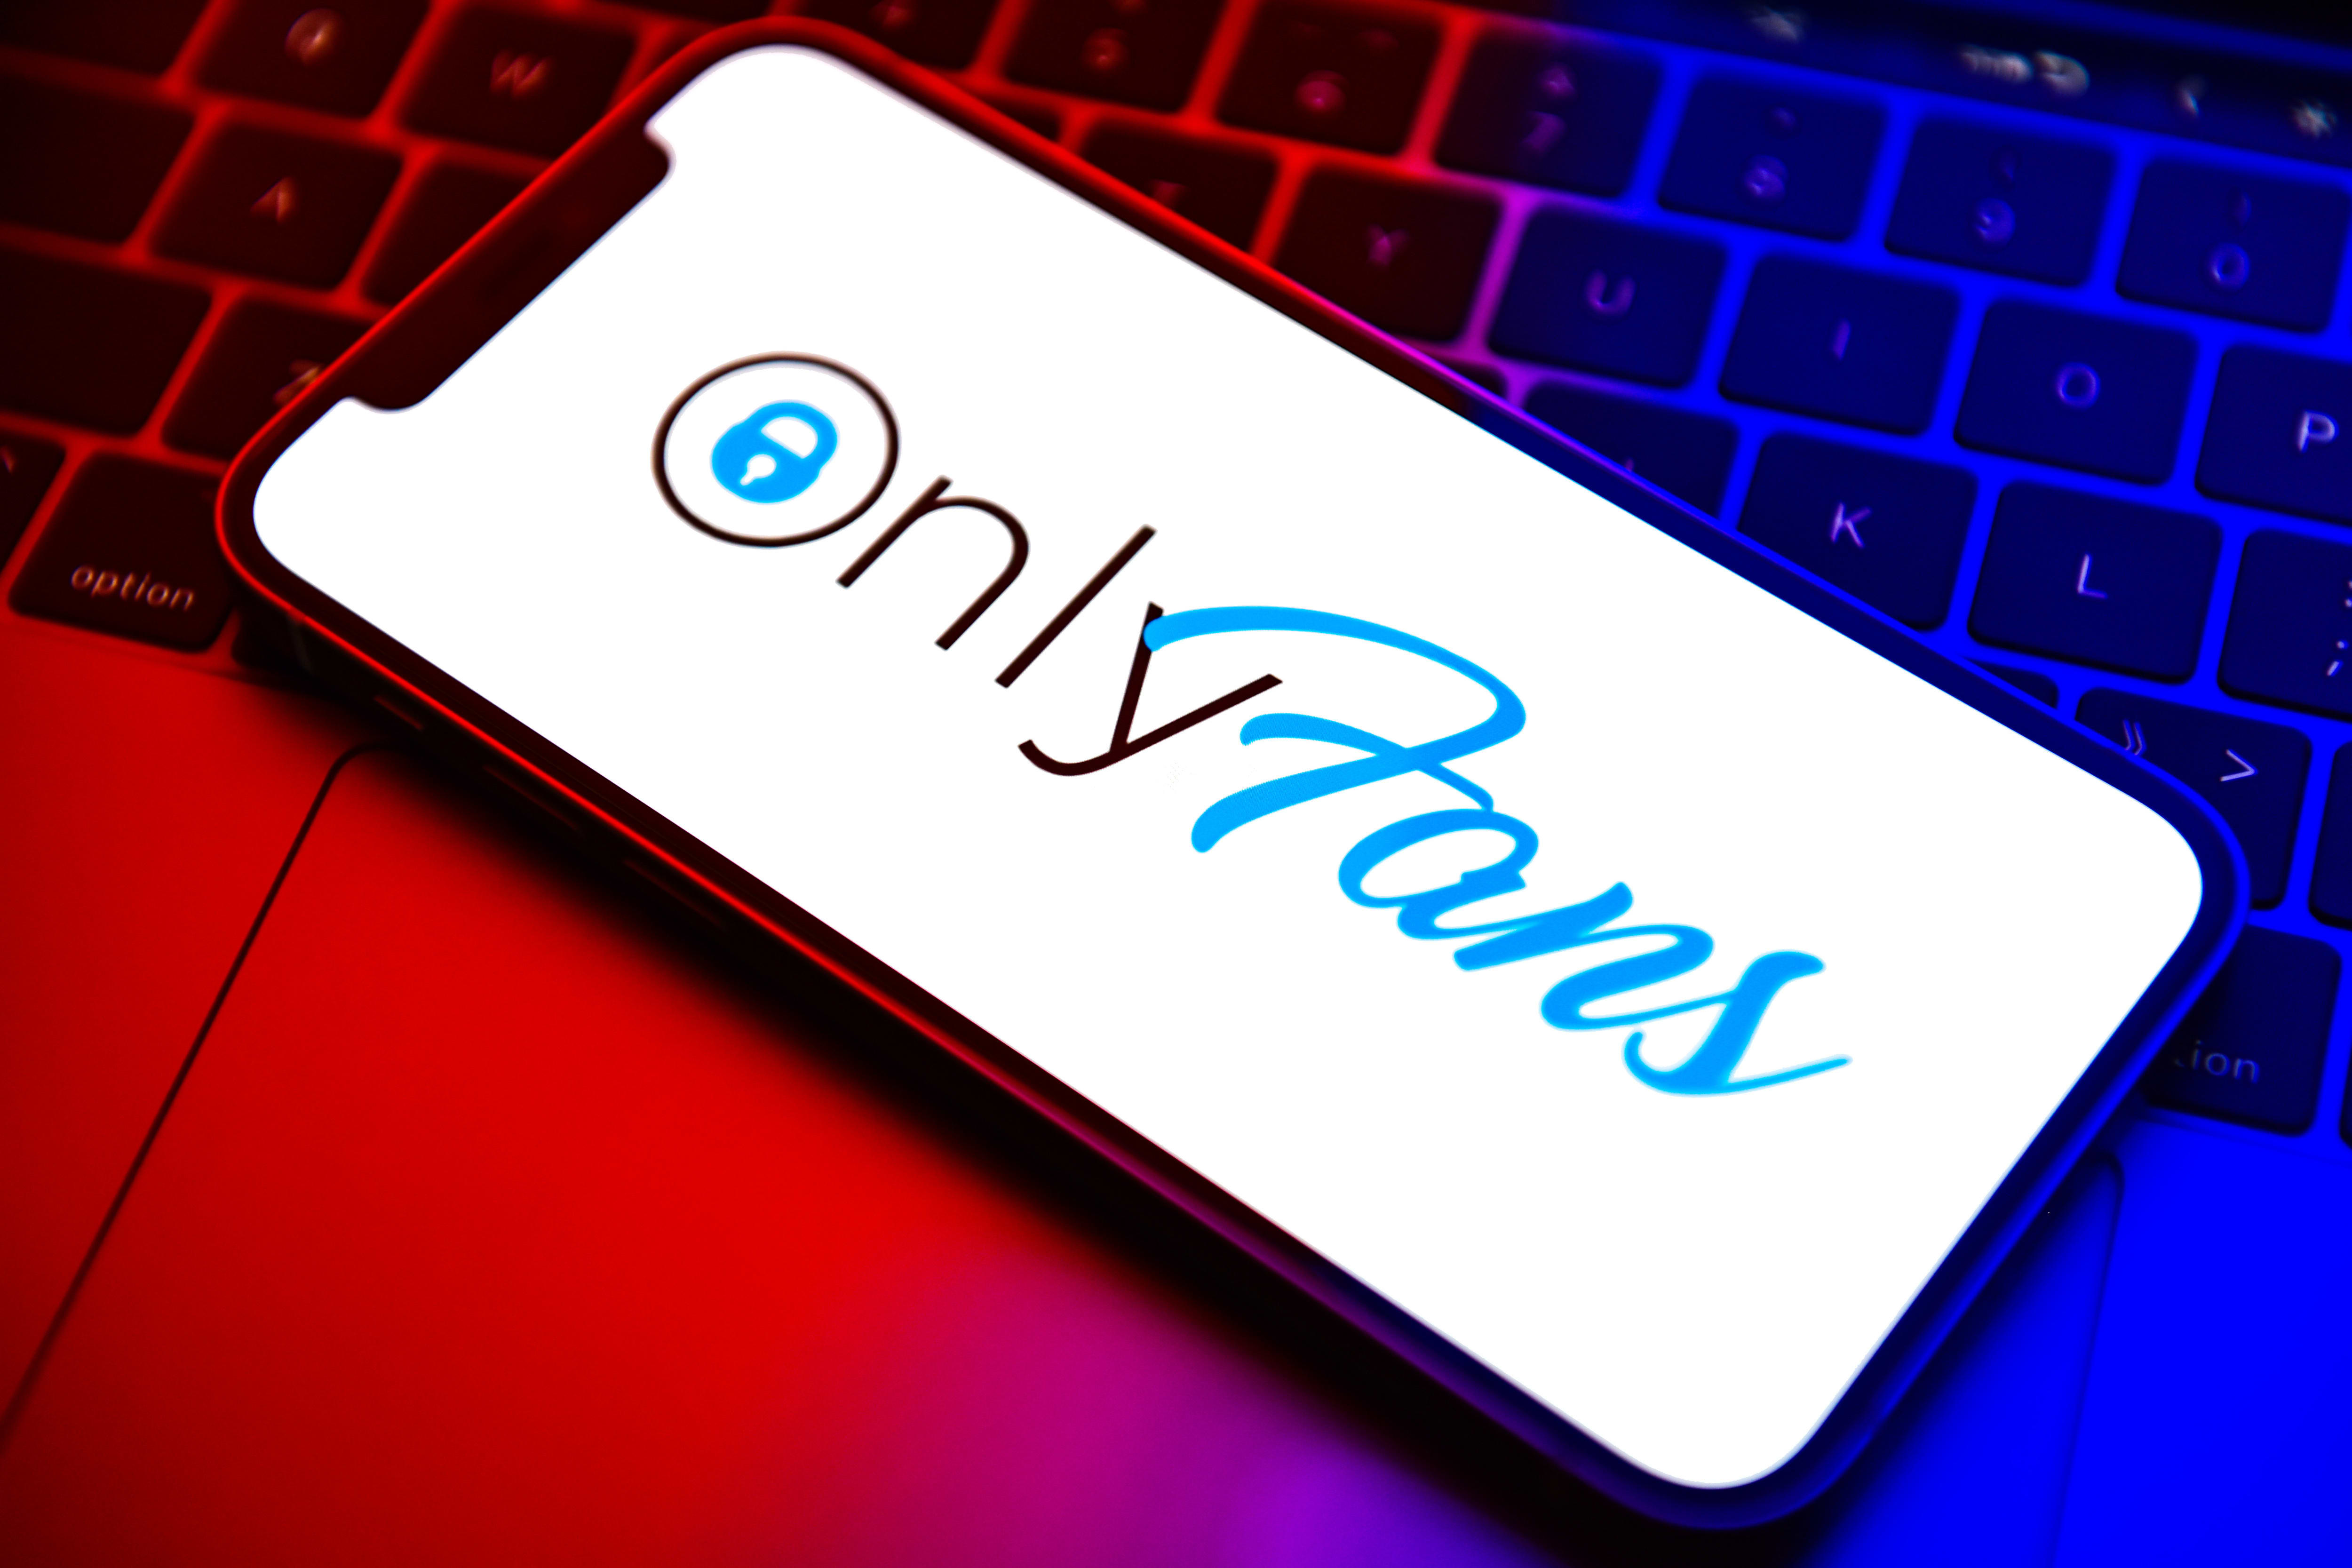 How to invest in onlyfans